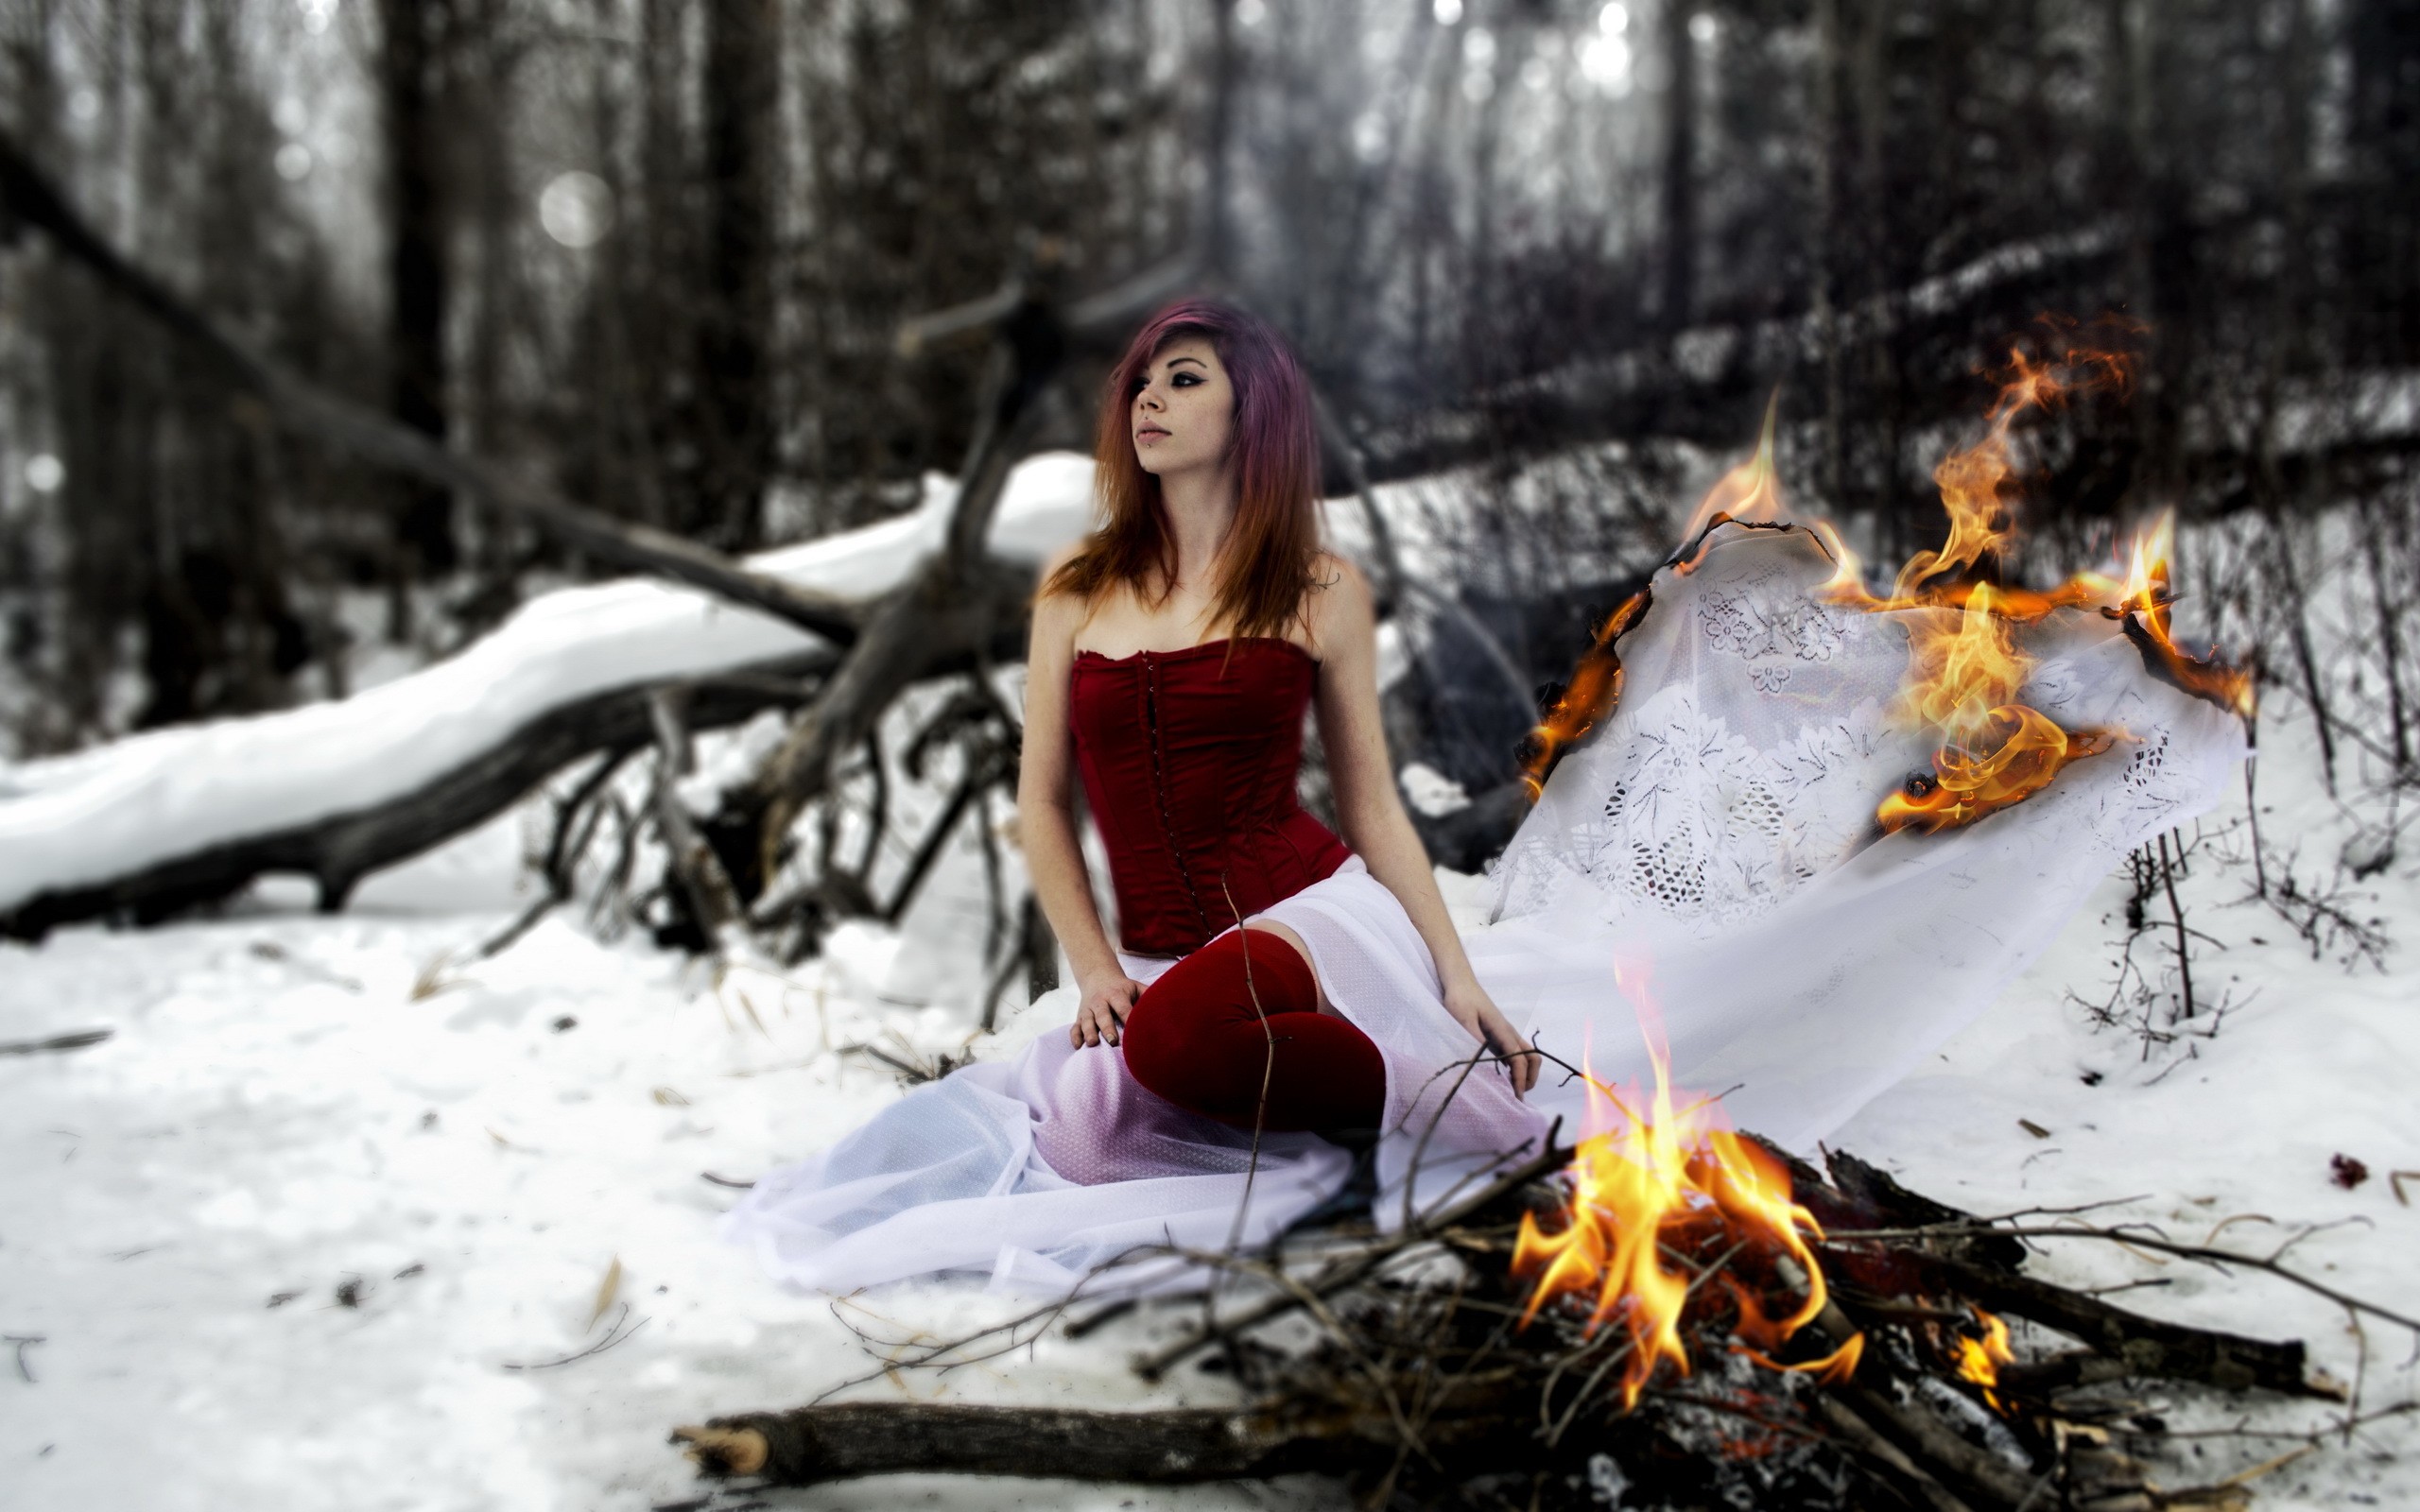 People 2560x1600 fire women outdoors women snow winter dress dyed hair forest depth of field fantasy girl cold red clothing model outdoors burning campfire